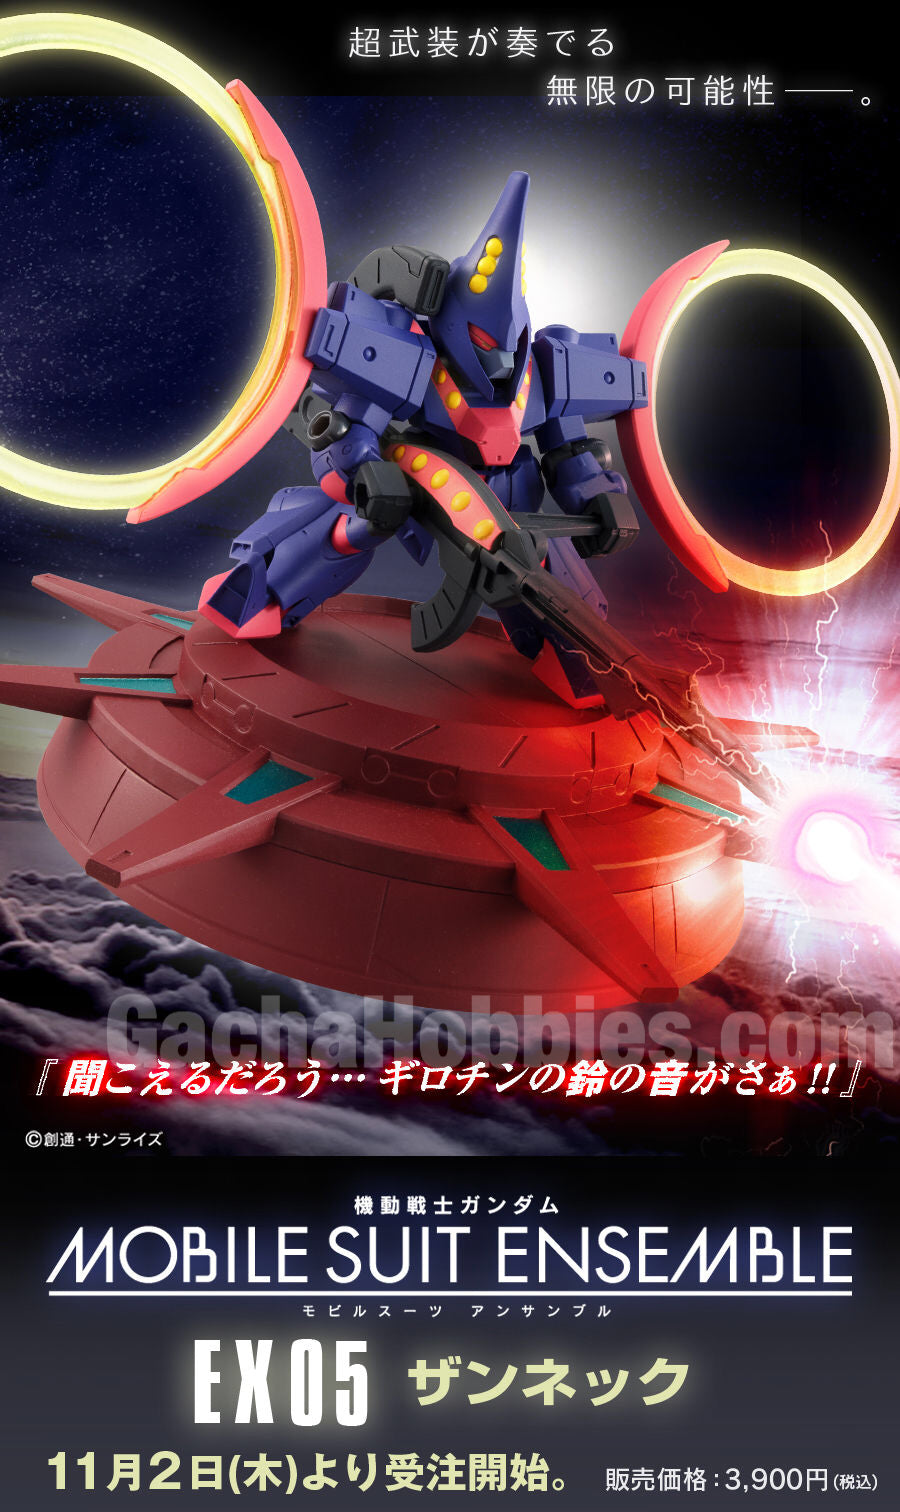 Mobile Suit Ensemble Ex 05 Zanneck Early Purchase With Bounes Limited Gacha Hobbies